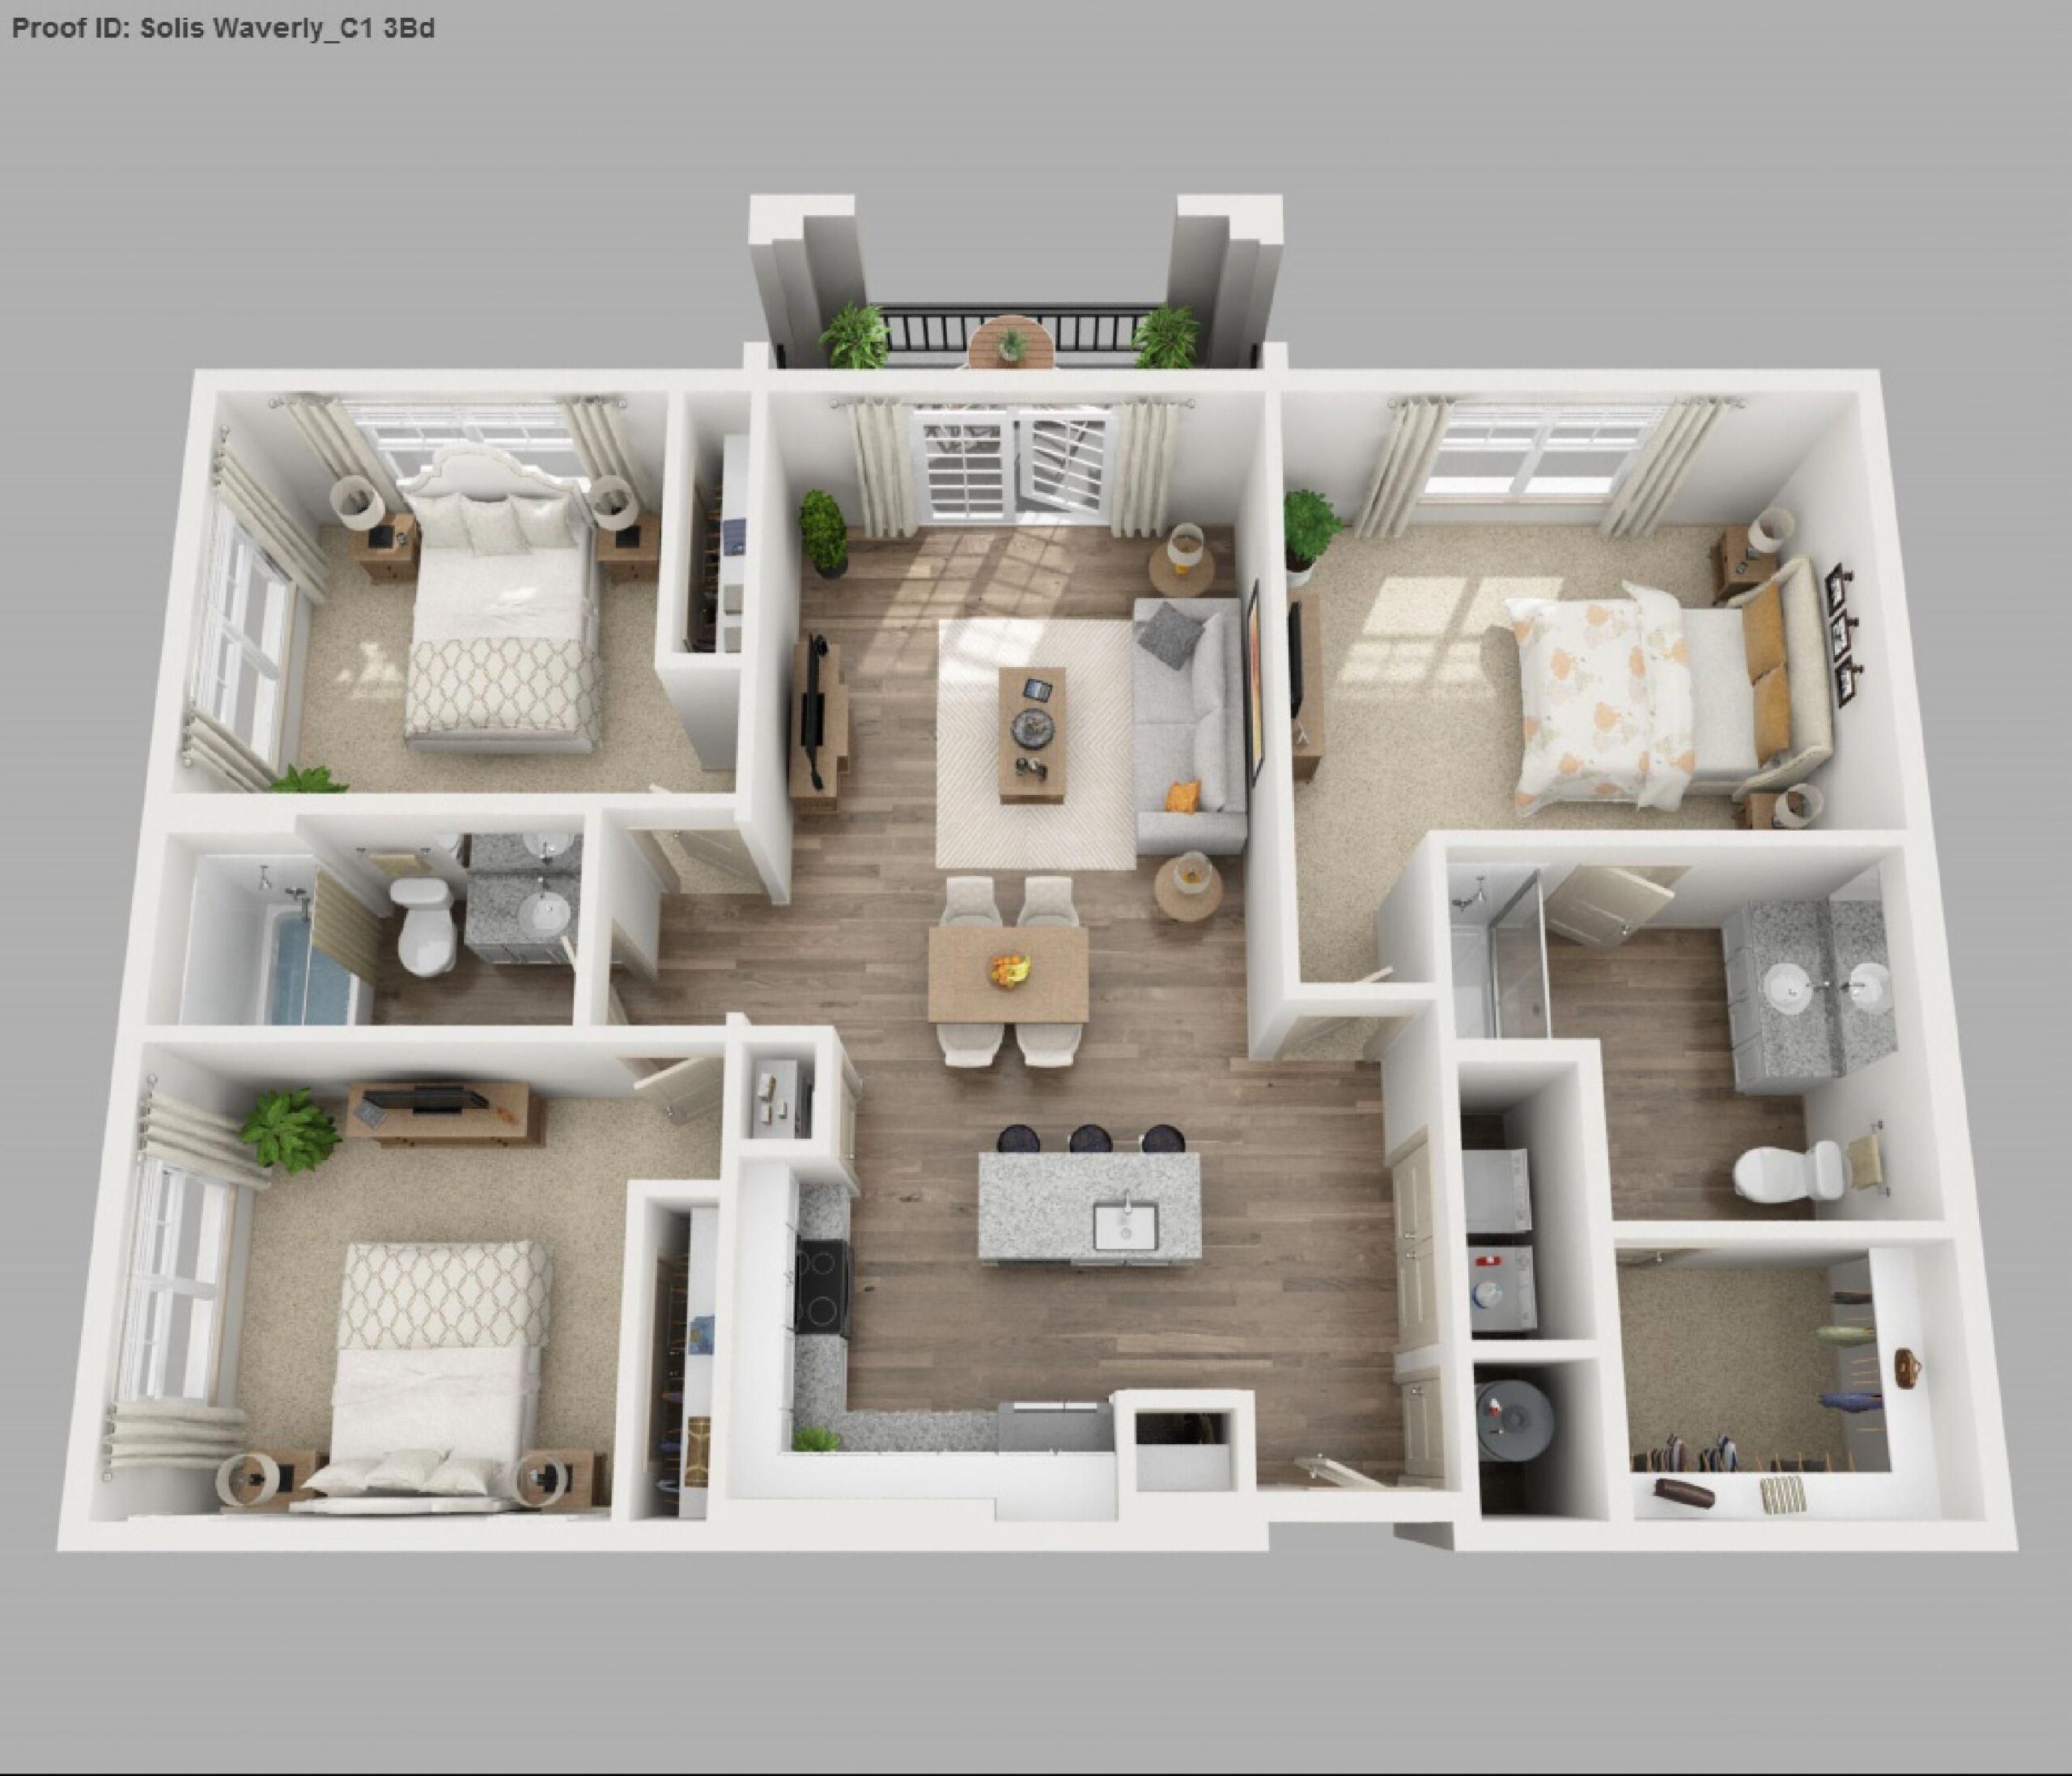 Remarkable bedroom design #interiorplanningbedroomtips | apartment floor plans intended for incredible plans for small 3 bedroomed houses 3d